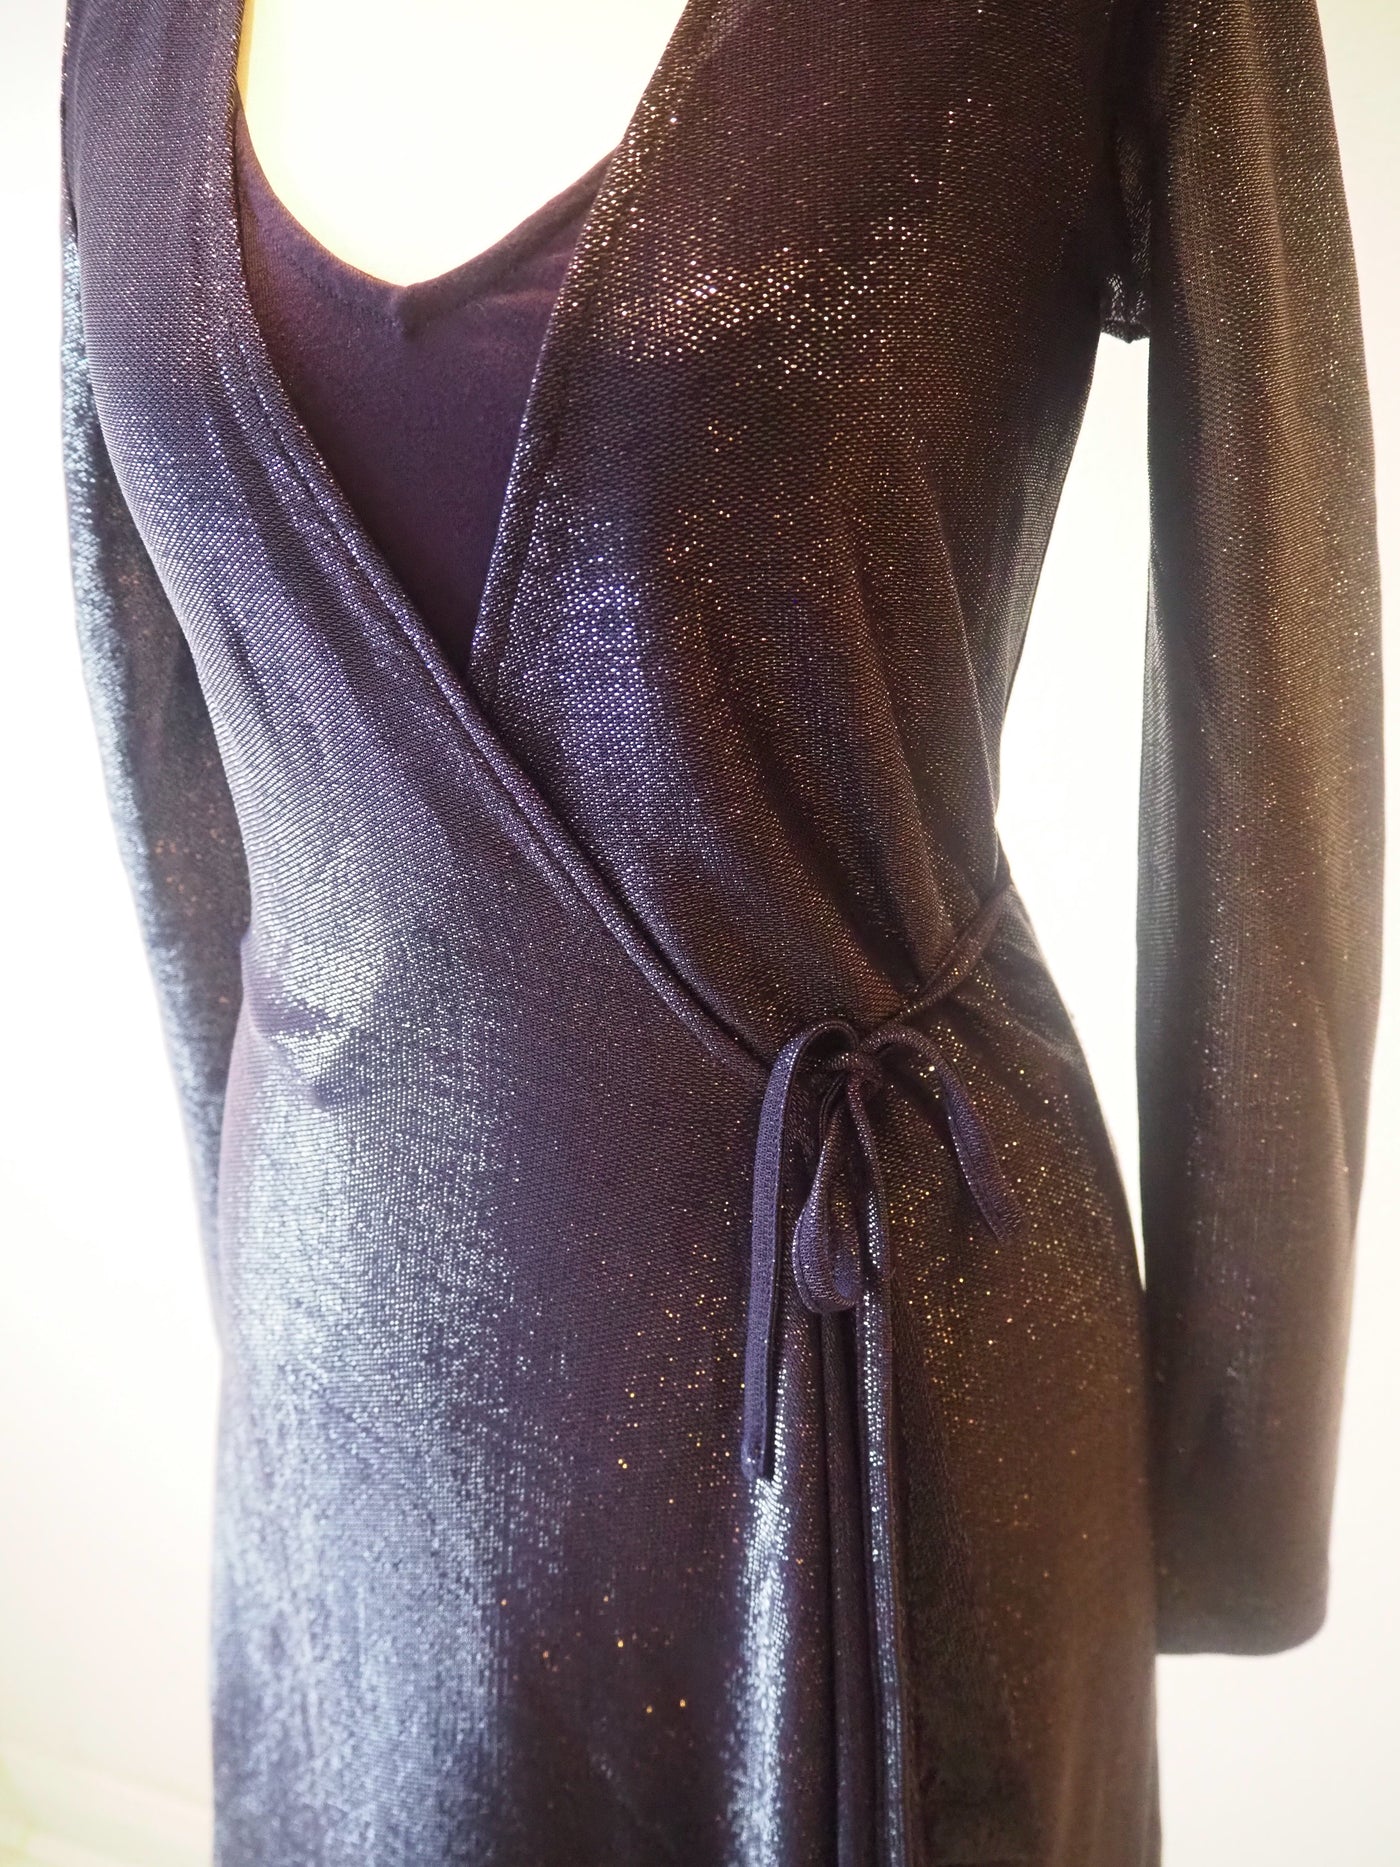 & Other Stories Navy Wrap Sparkle Dress Small